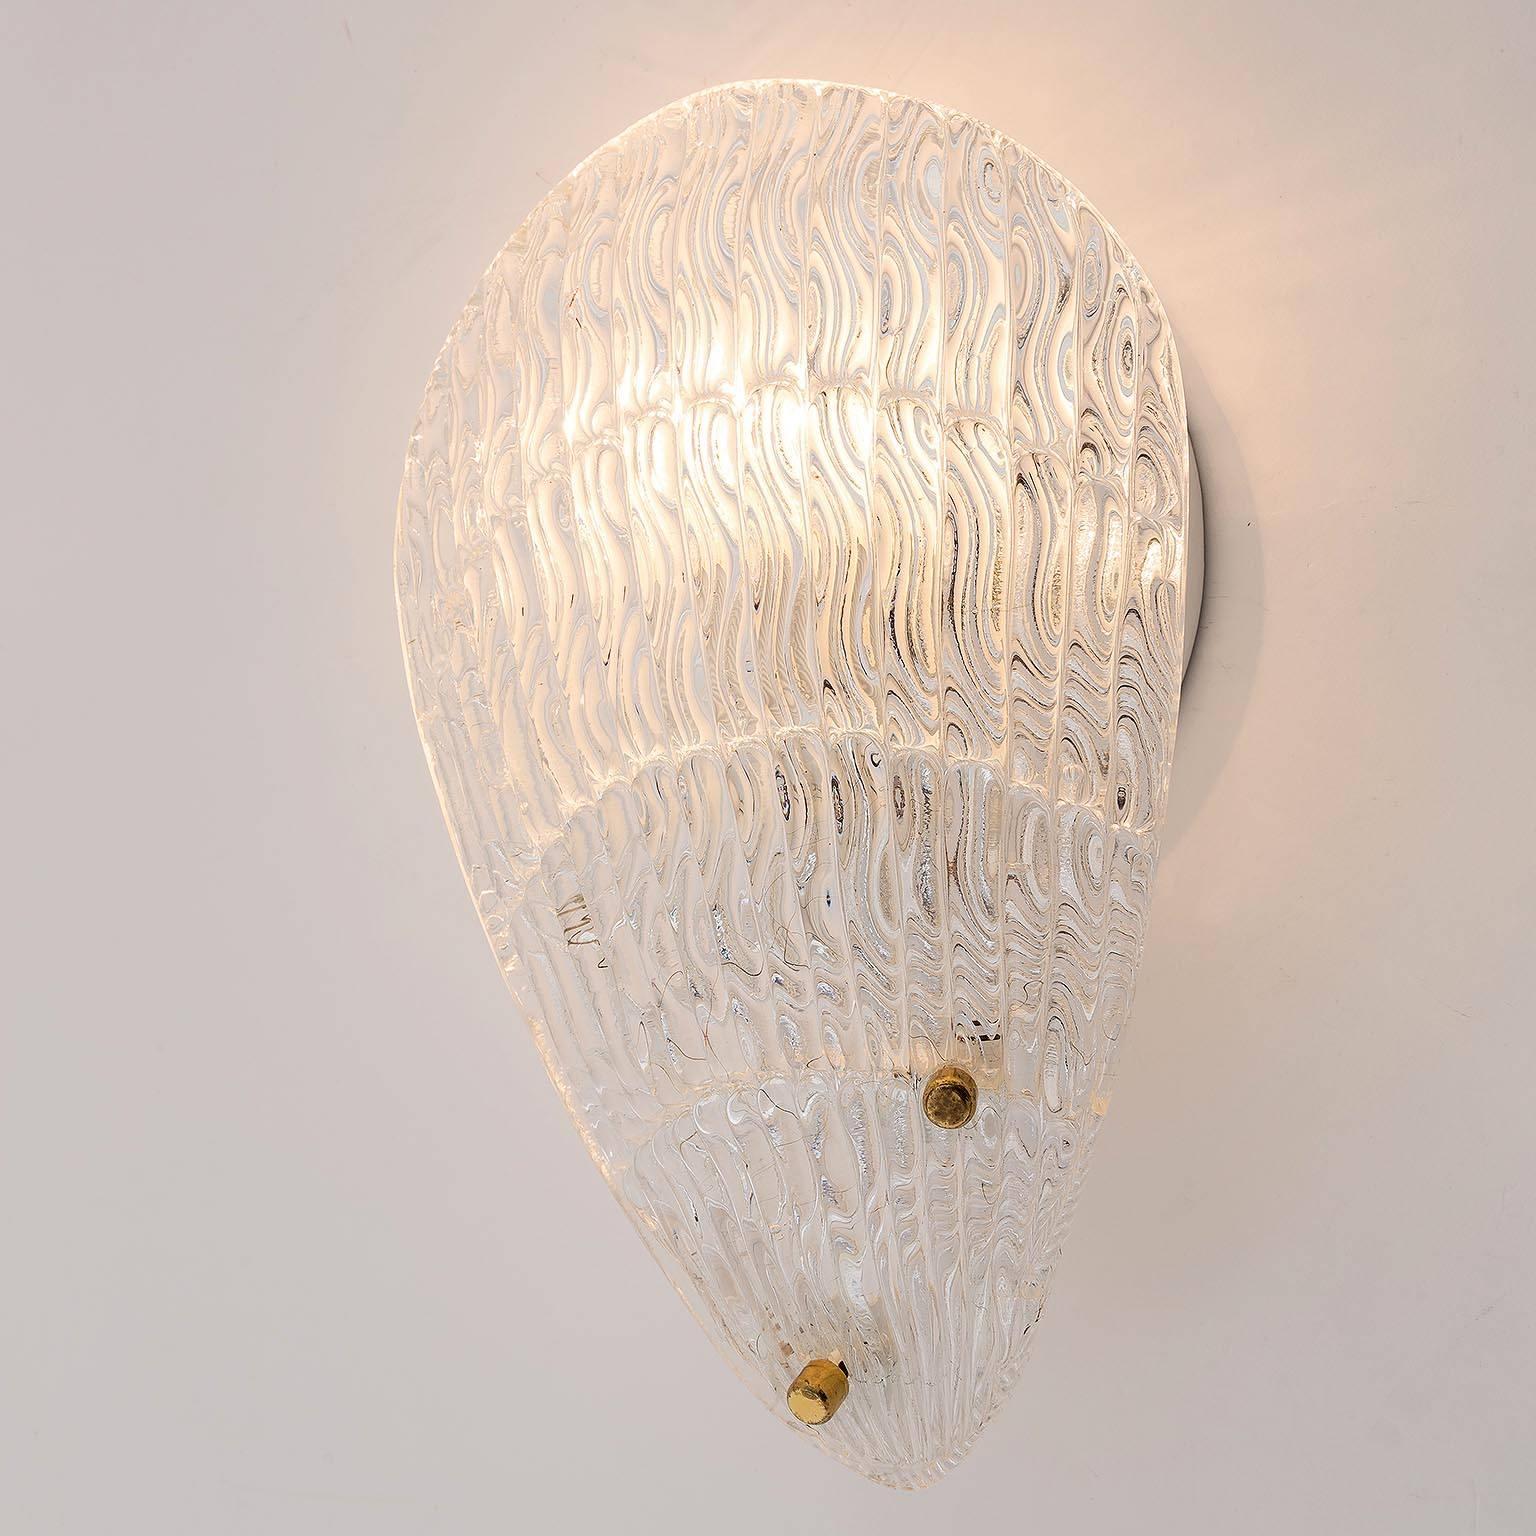 Mid-20th Century 1 of 3 Shell Textured Glass Sconces Wall Lights by Rupert Nikoll, Vienna, 1950s For Sale